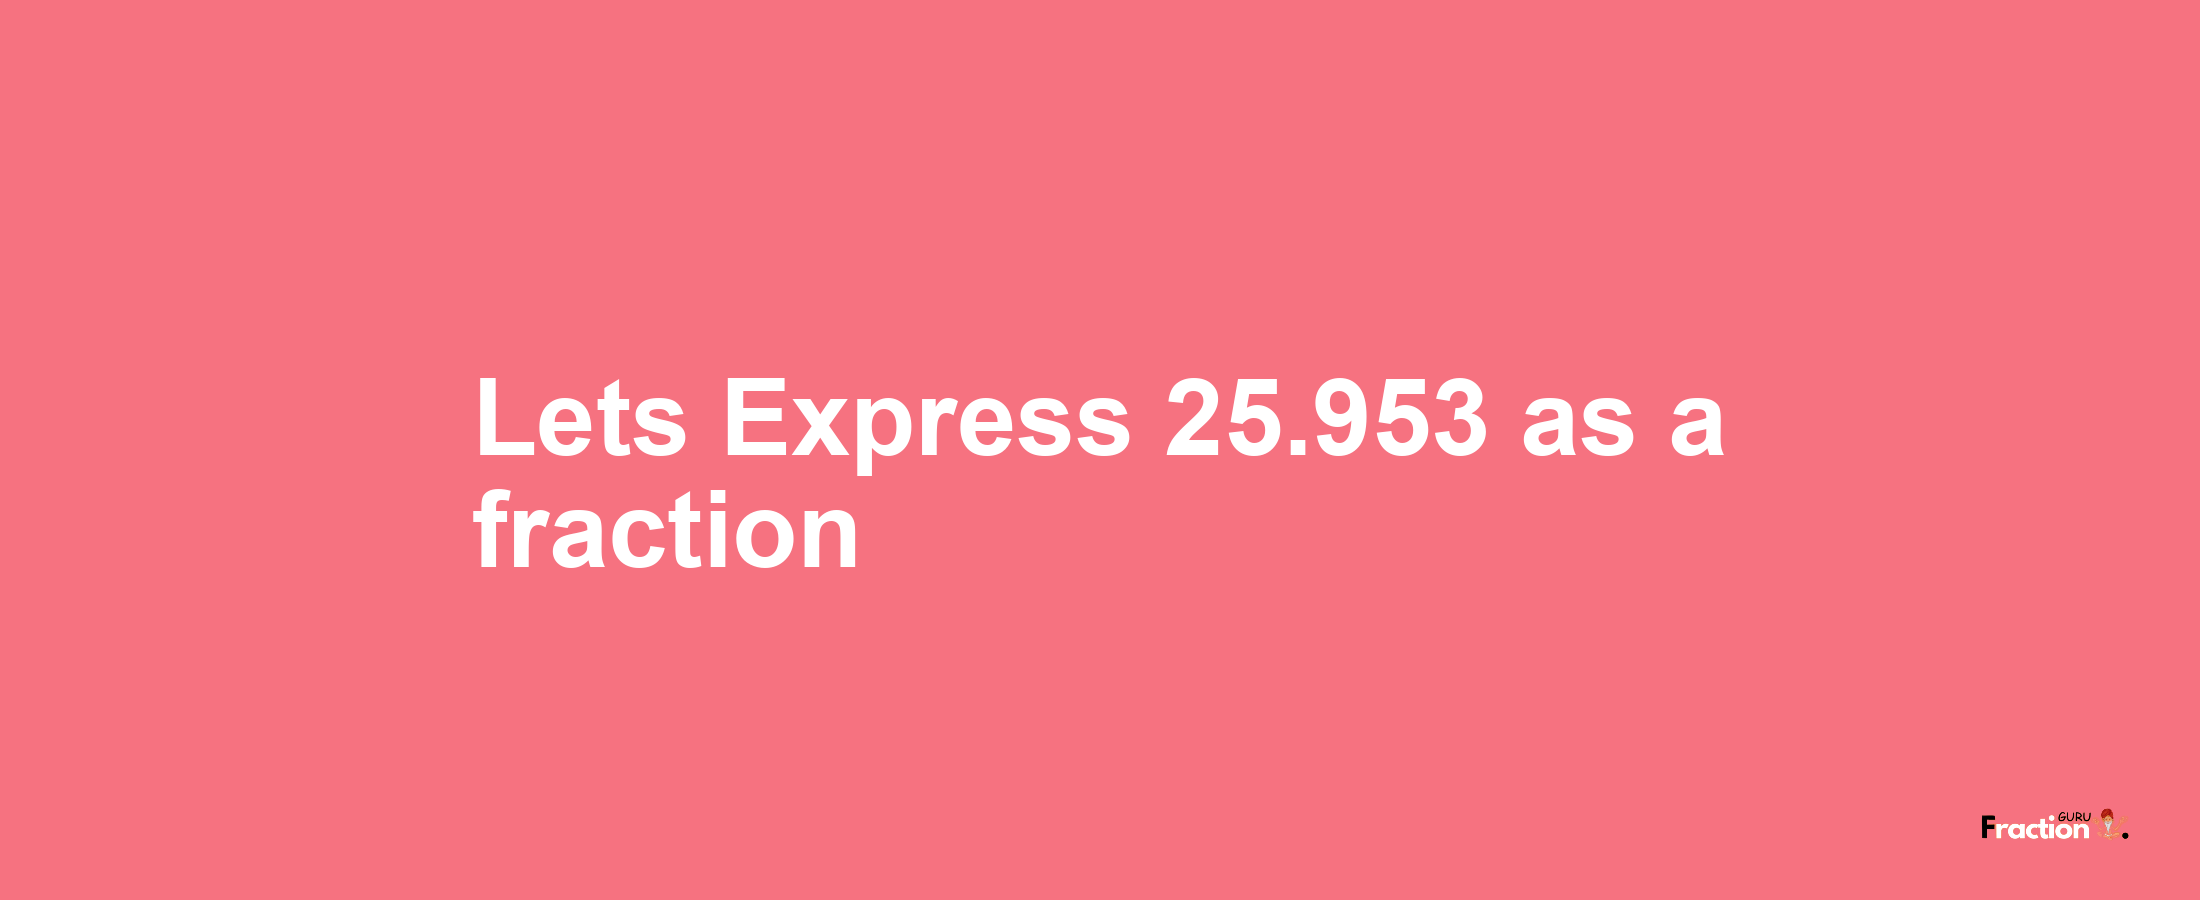 Lets Express 25.953 as afraction